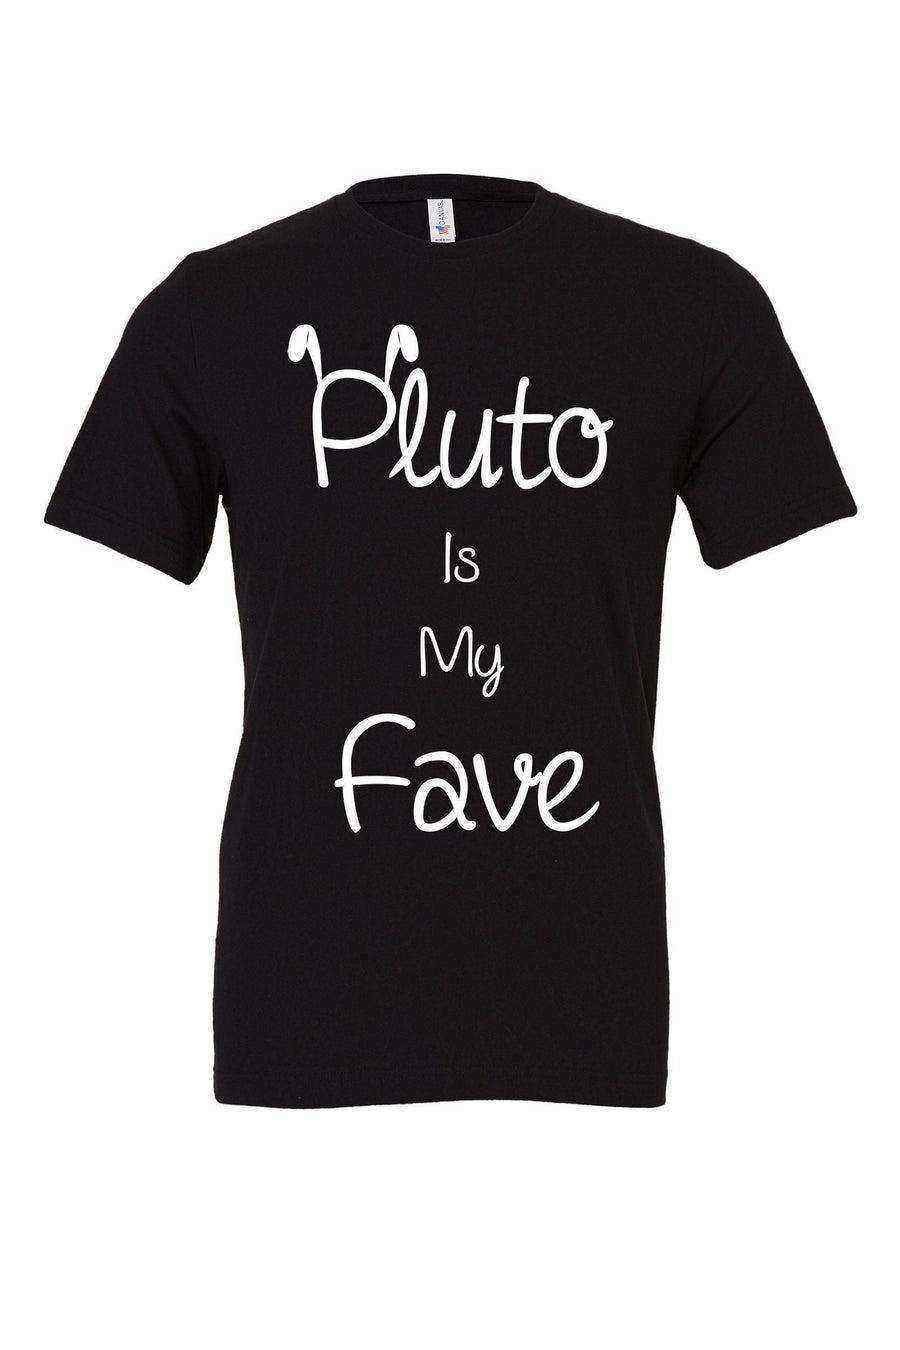 Pluto is my Fave Shirt - Dylan's Tees